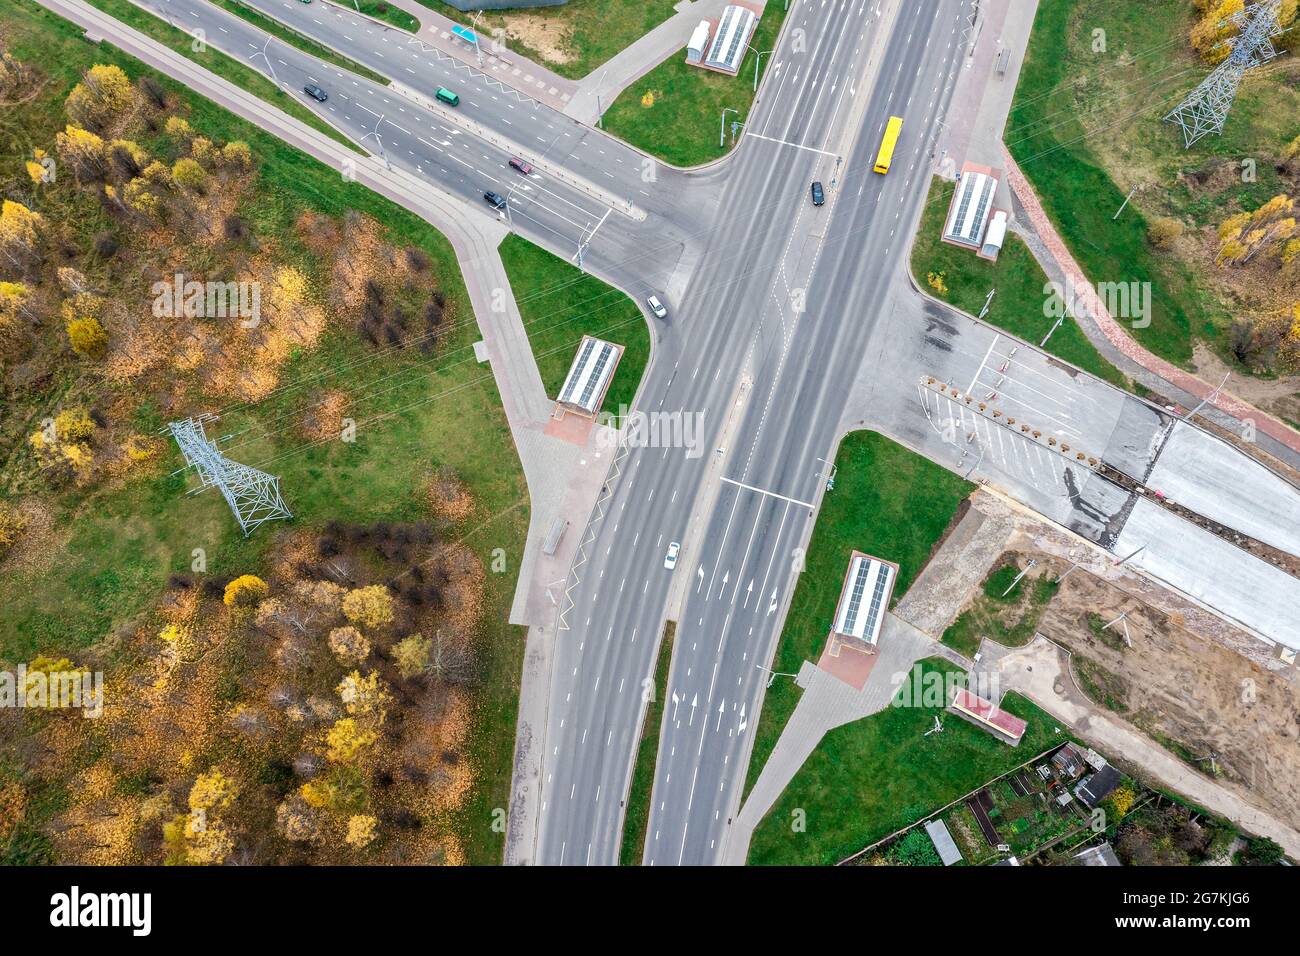 aerial view of a road intersection with cars traffic. drone point view Stock Photo